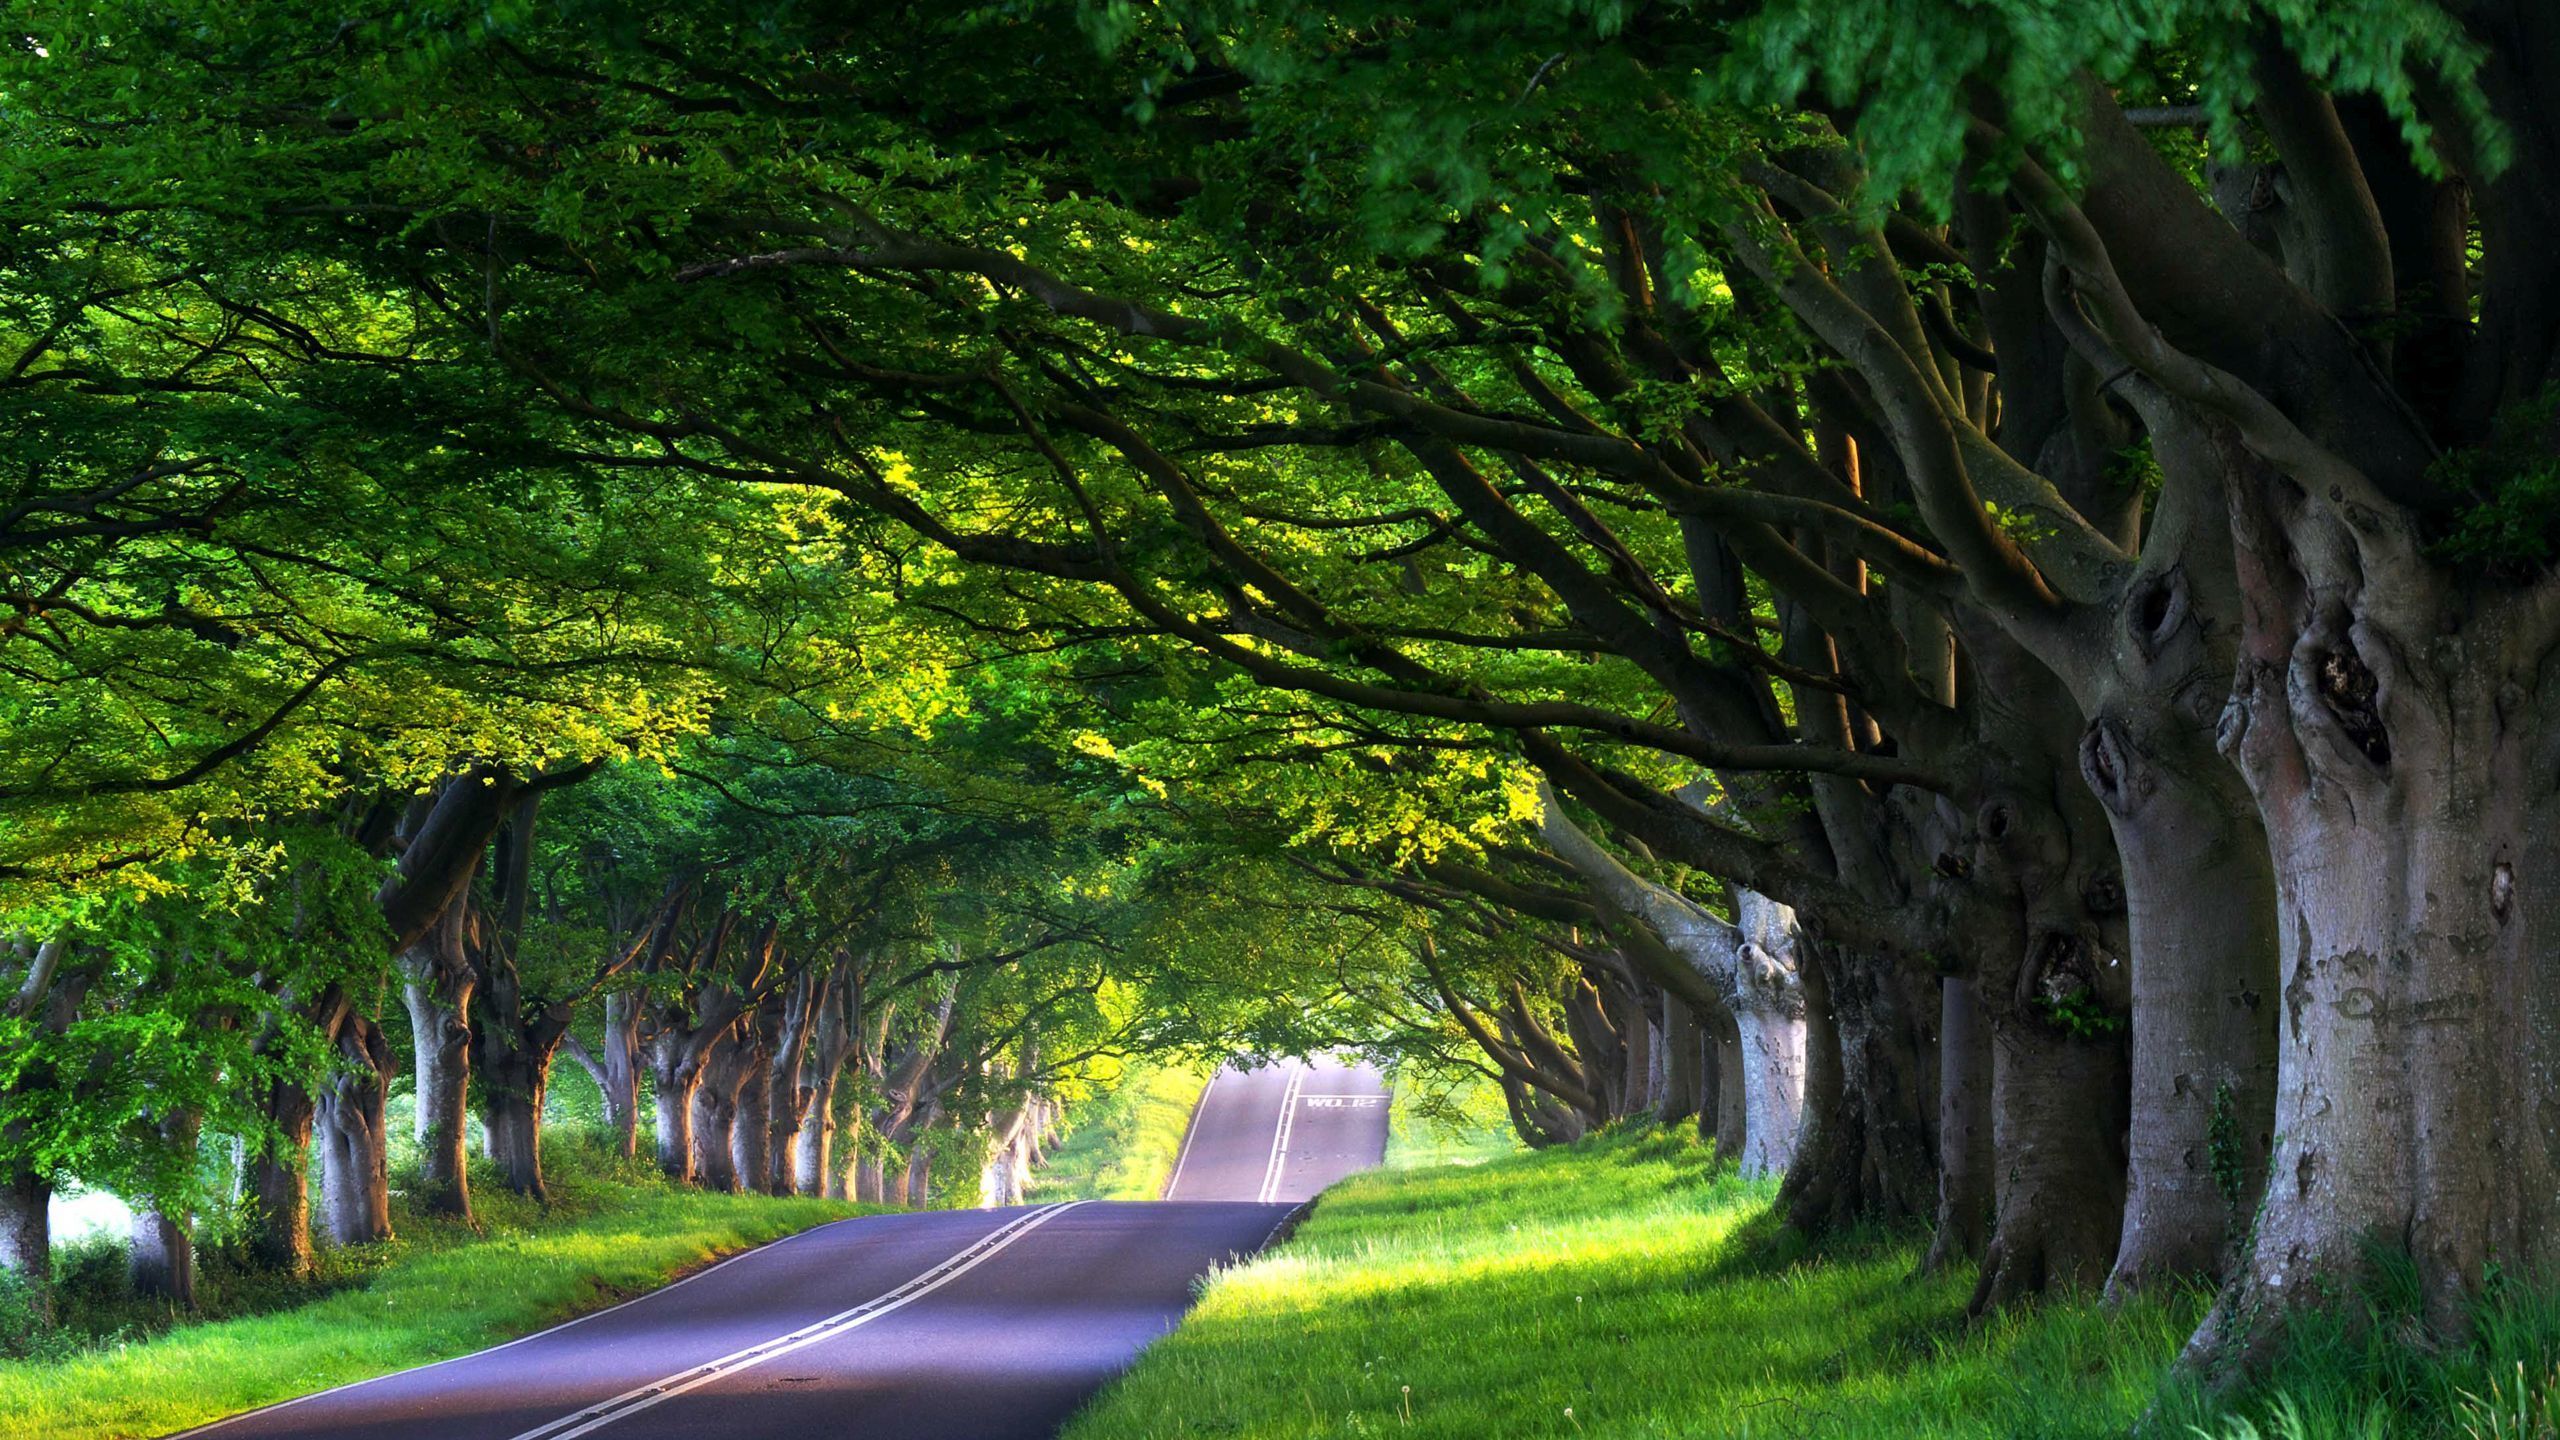 Trees Along The Road Wallpapers - Wallpaper Cave